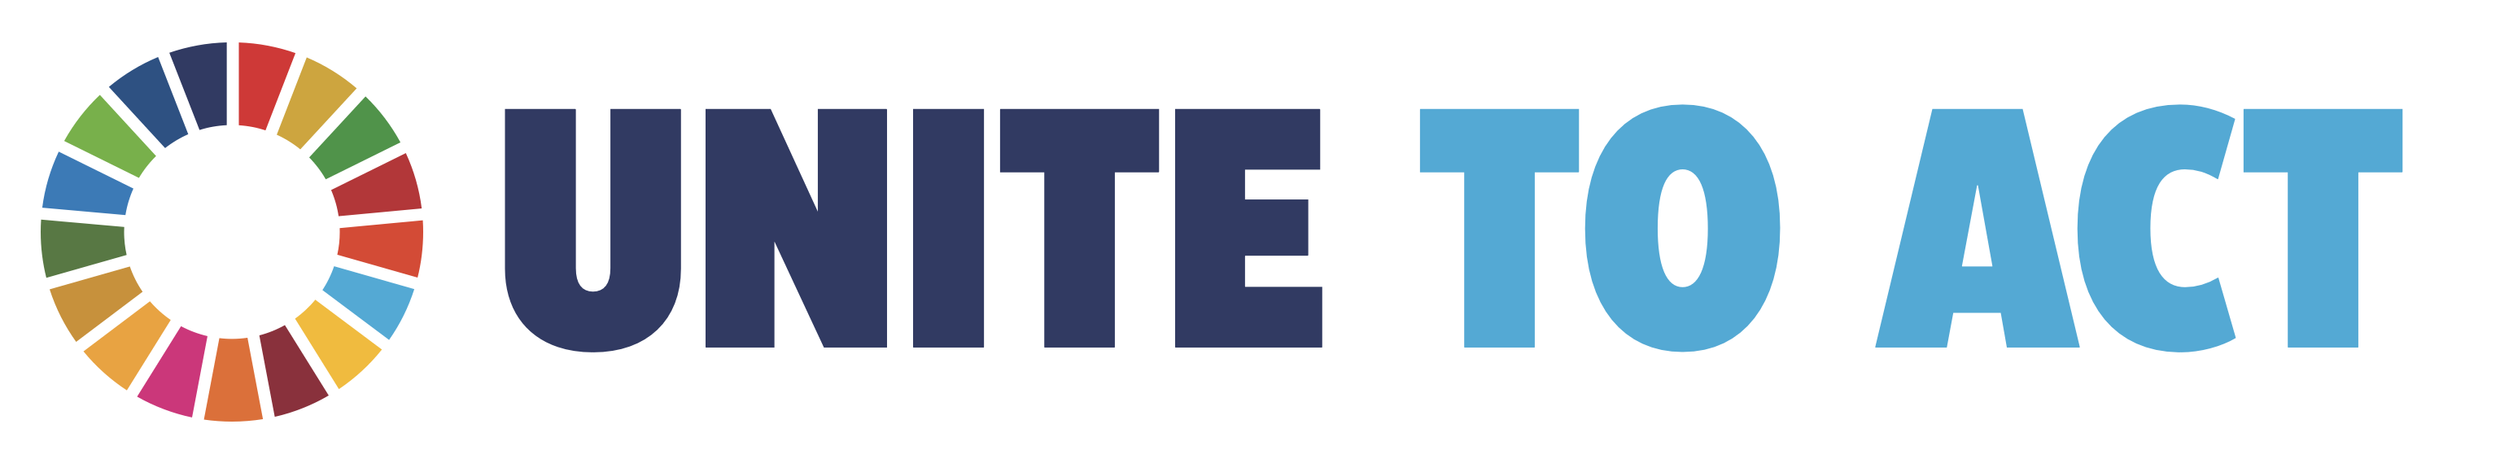 Unite to Act logo (1).png